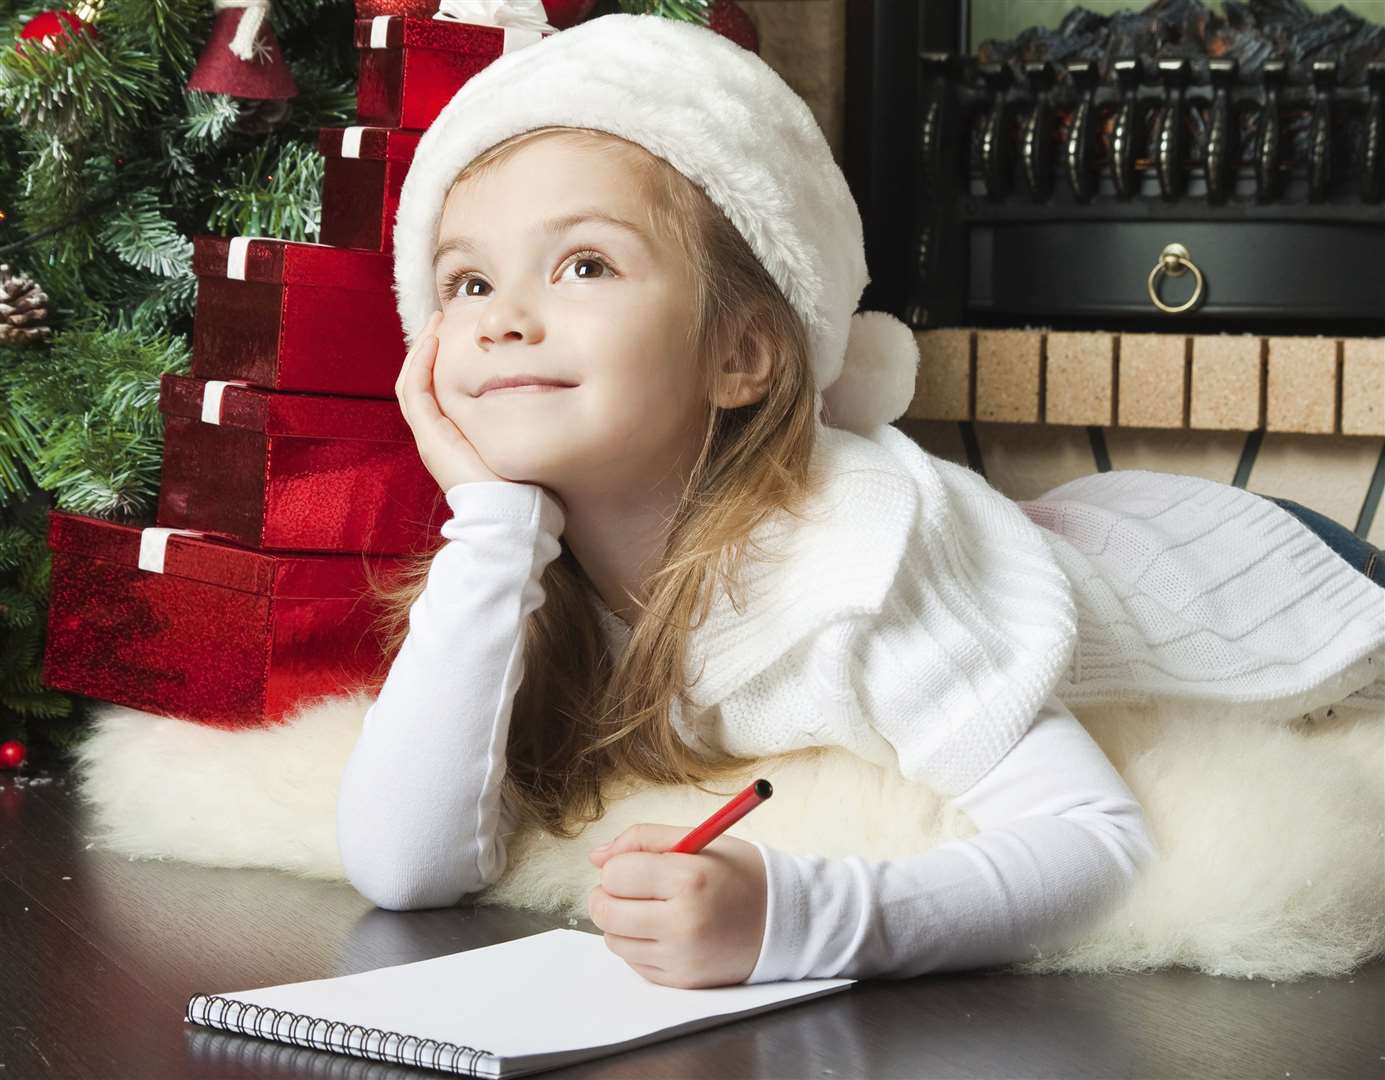 Royal Mail has taken a peek inside children’s letters to find out what they really want for Christmas.